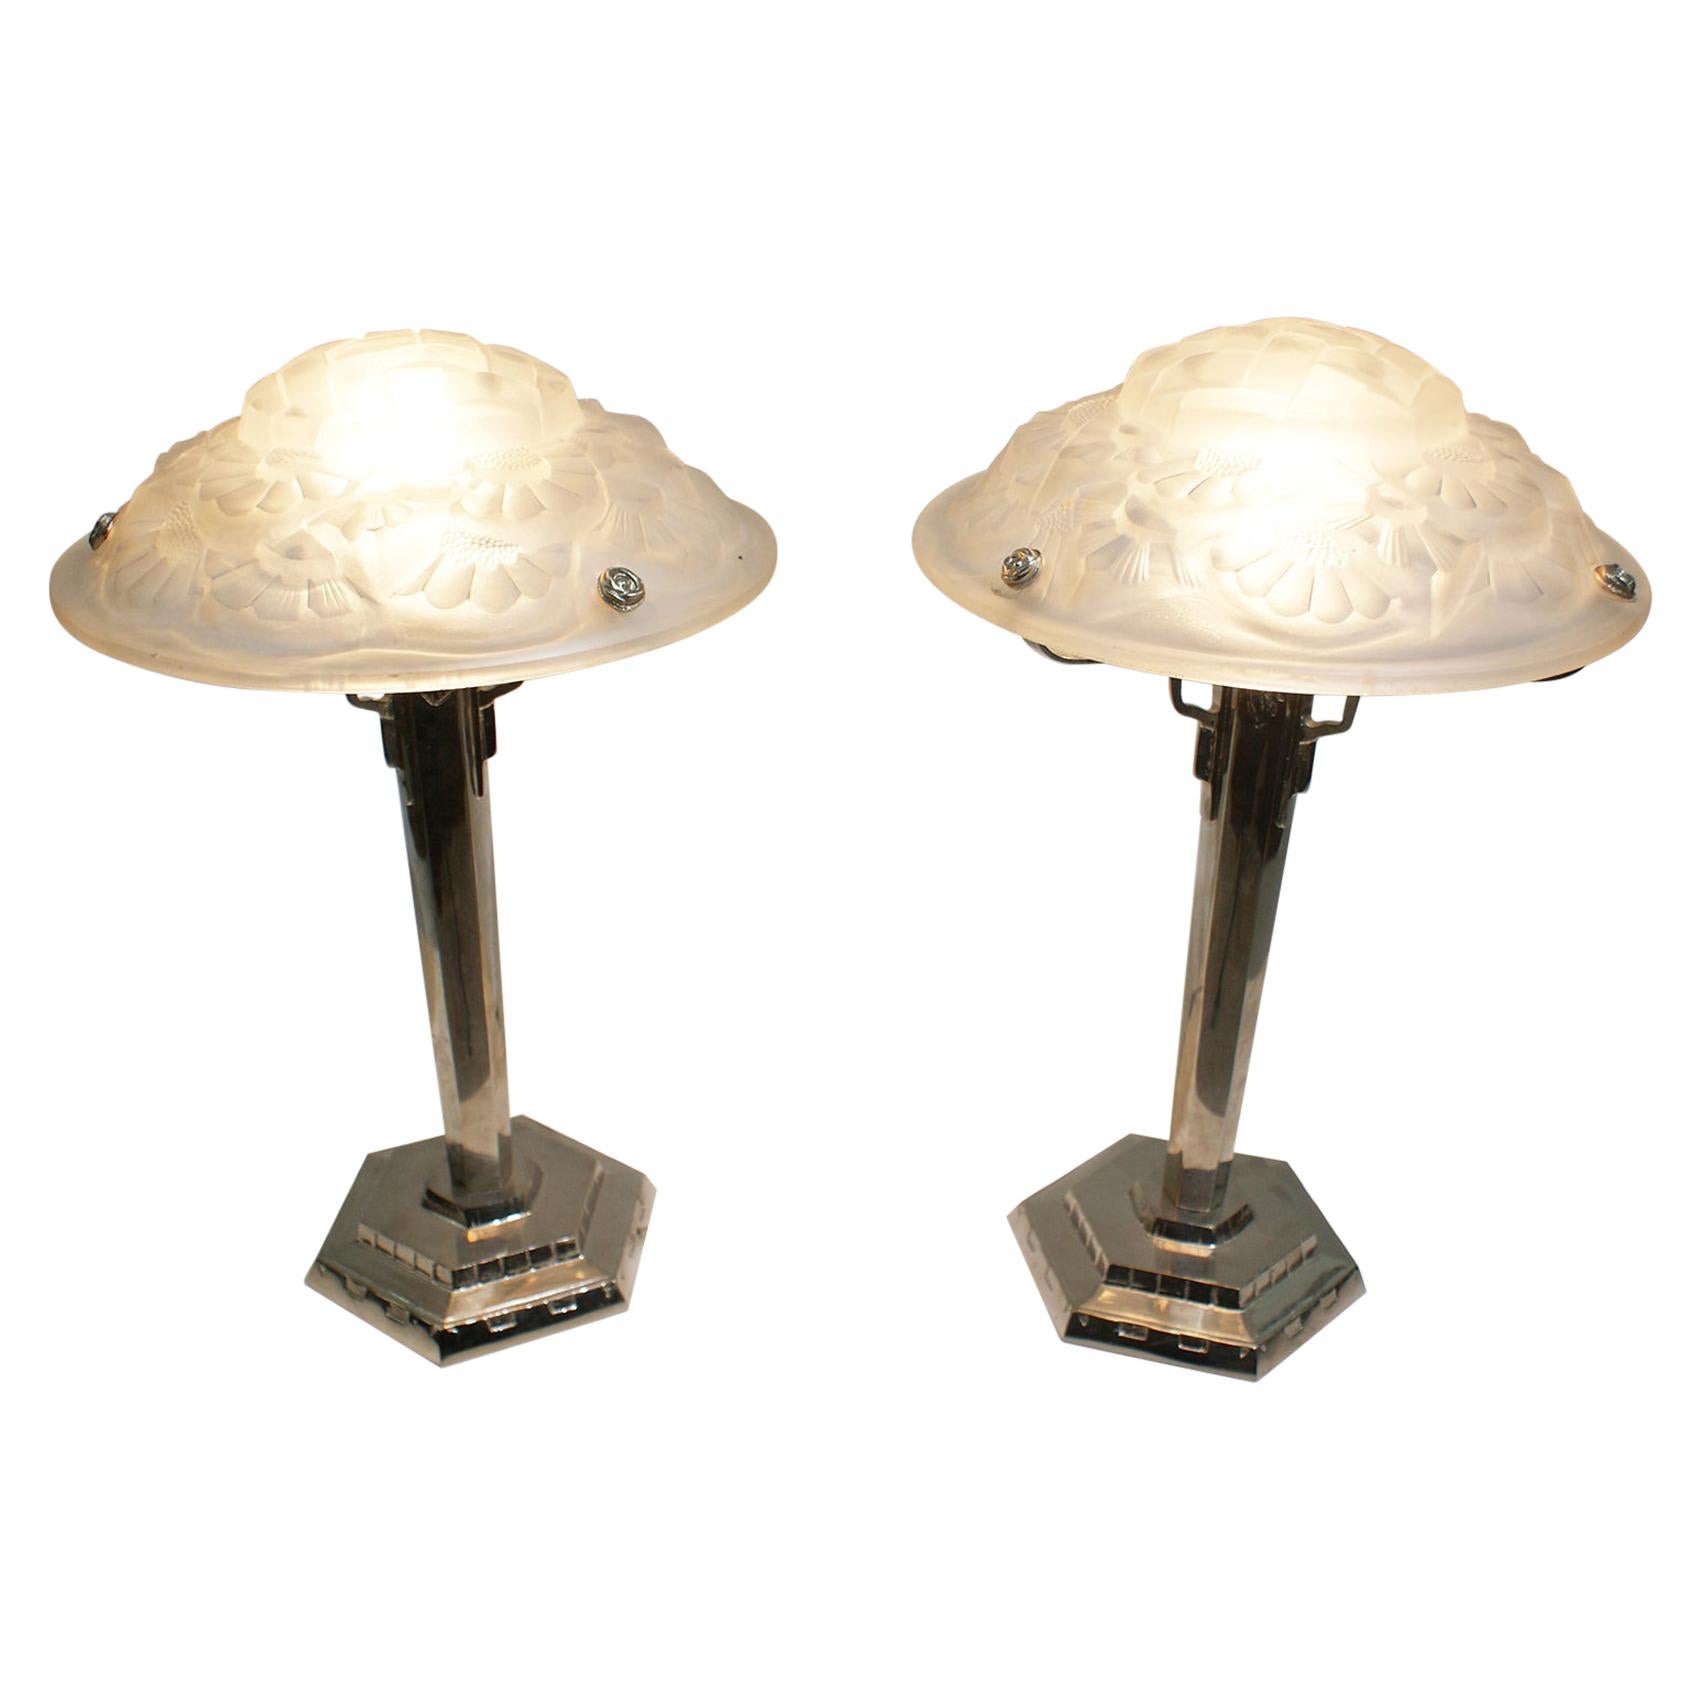 Pair of French Art Deco Table Lamp Signed “Degué”